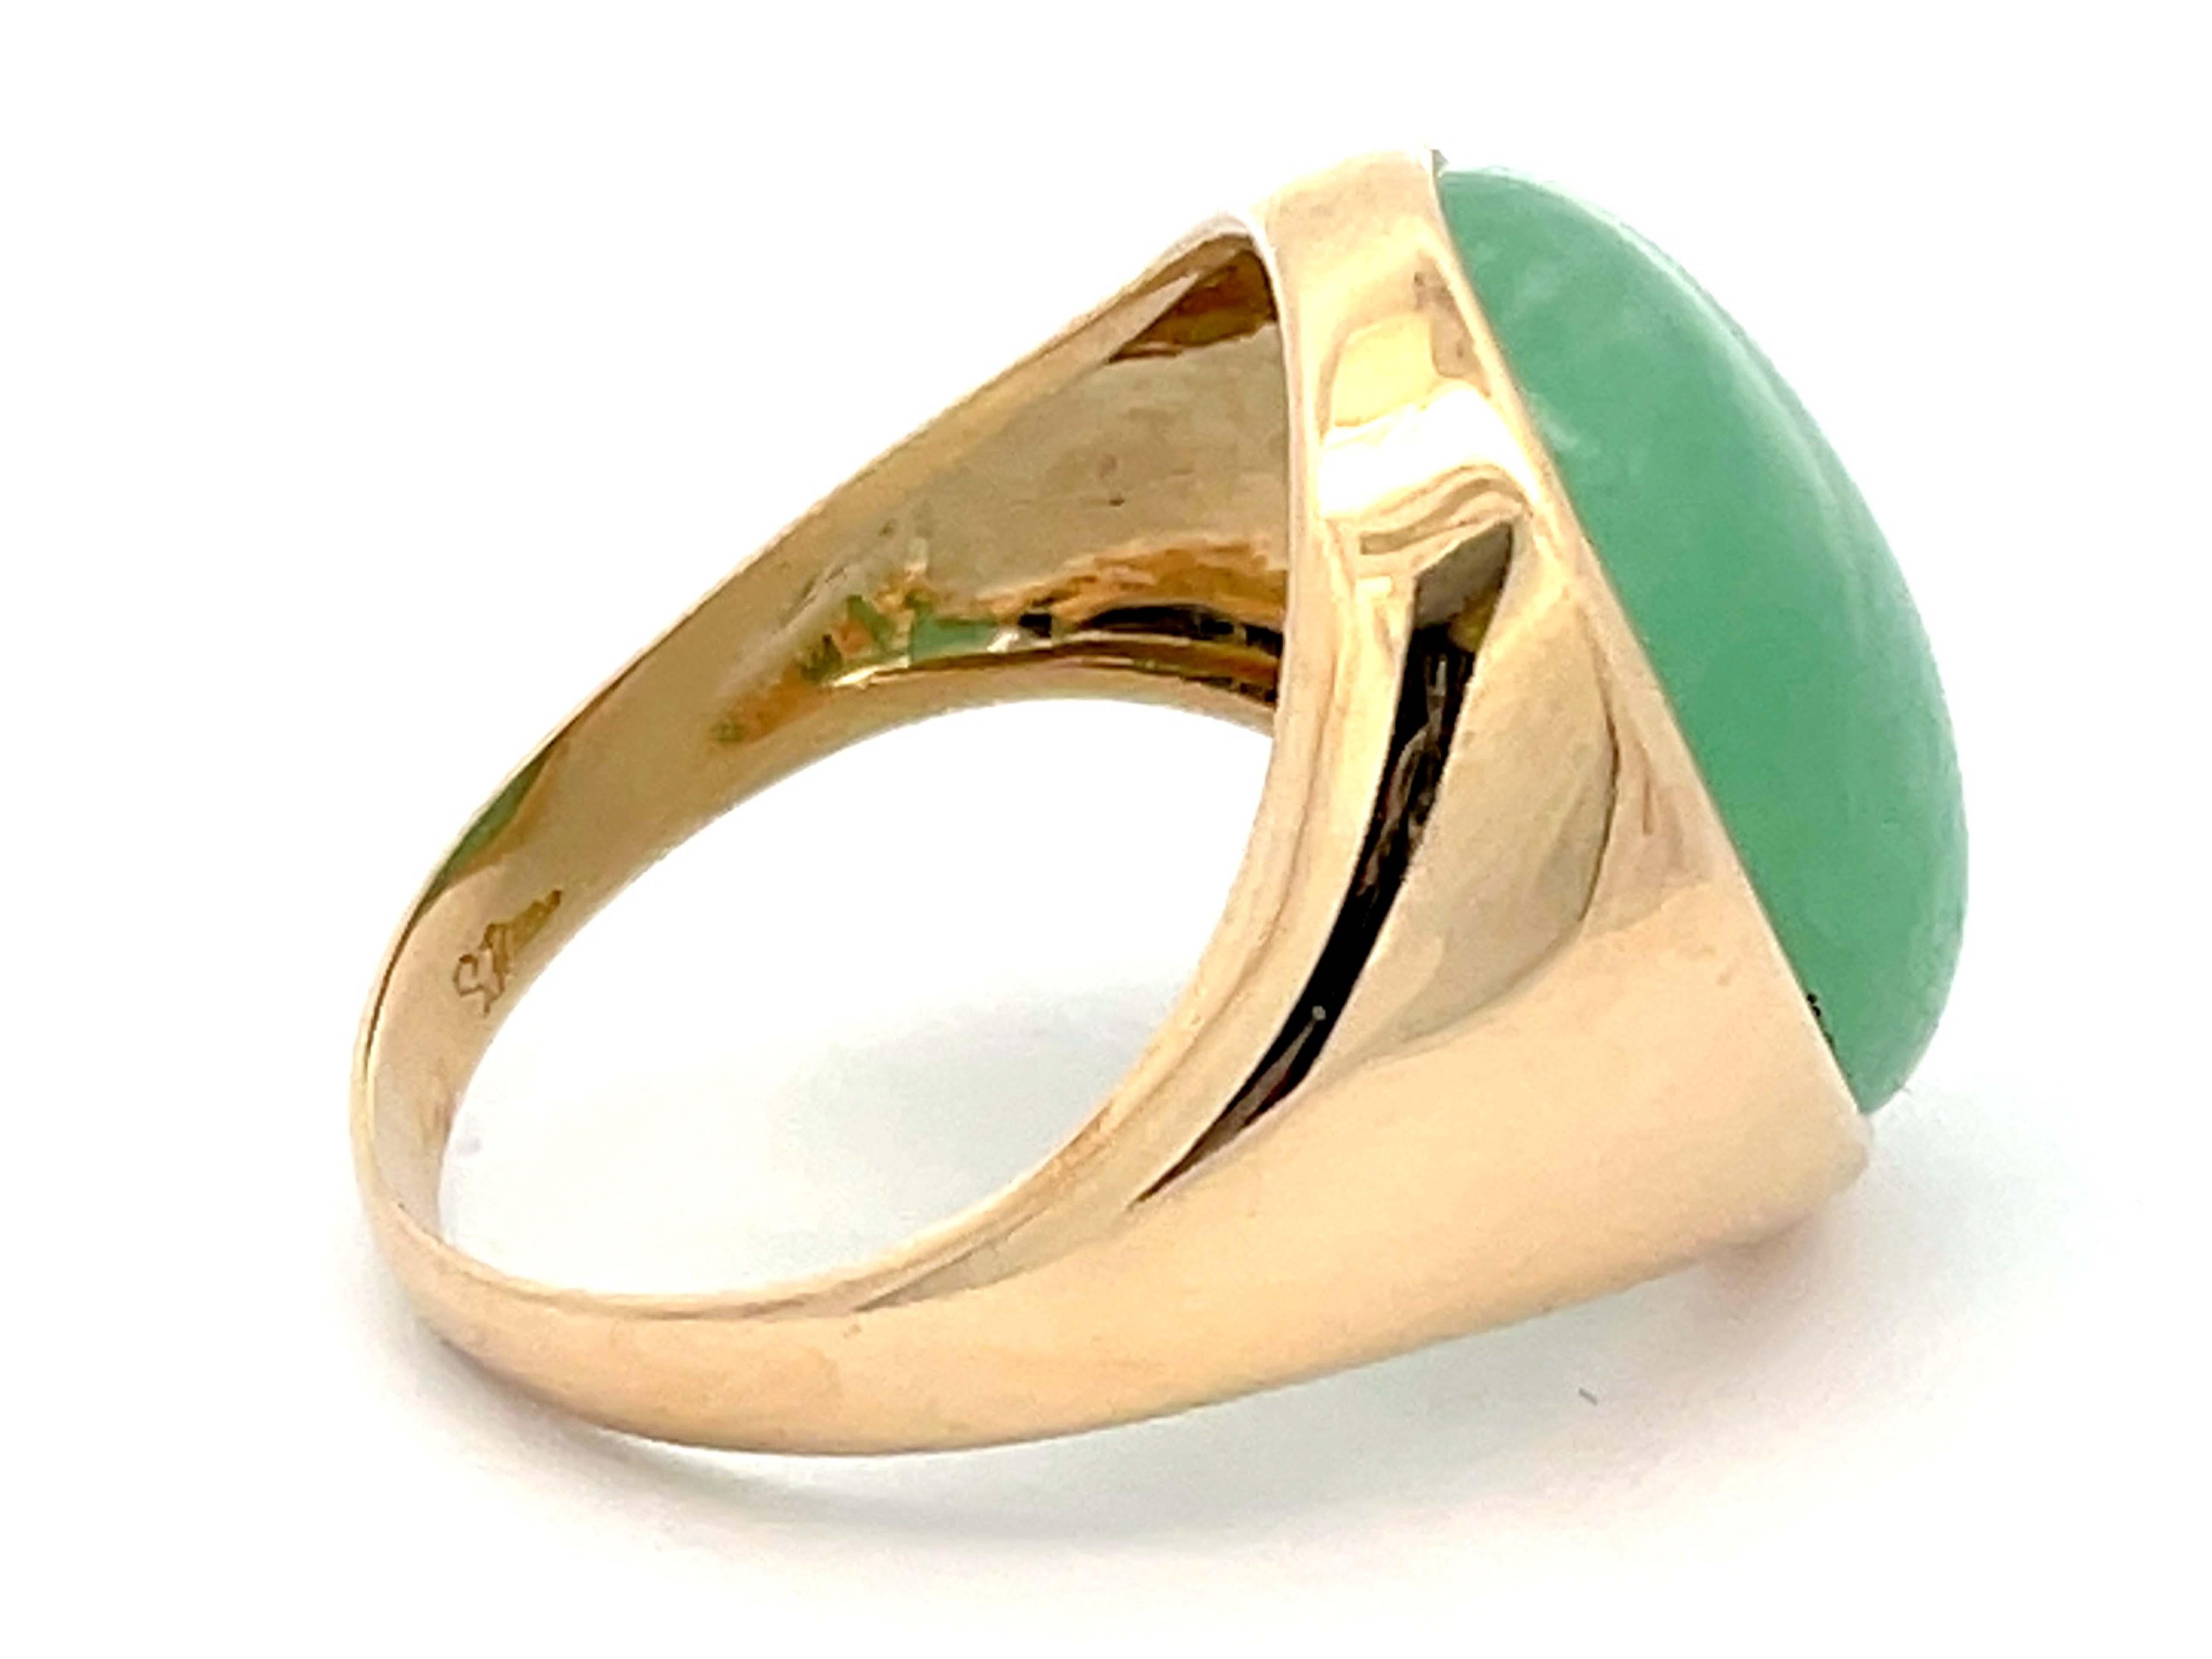 22 Carat Oval Cabochon Green Jade Ring in 14k Yellow Gold In Excellent Condition For Sale In Honolulu, HI